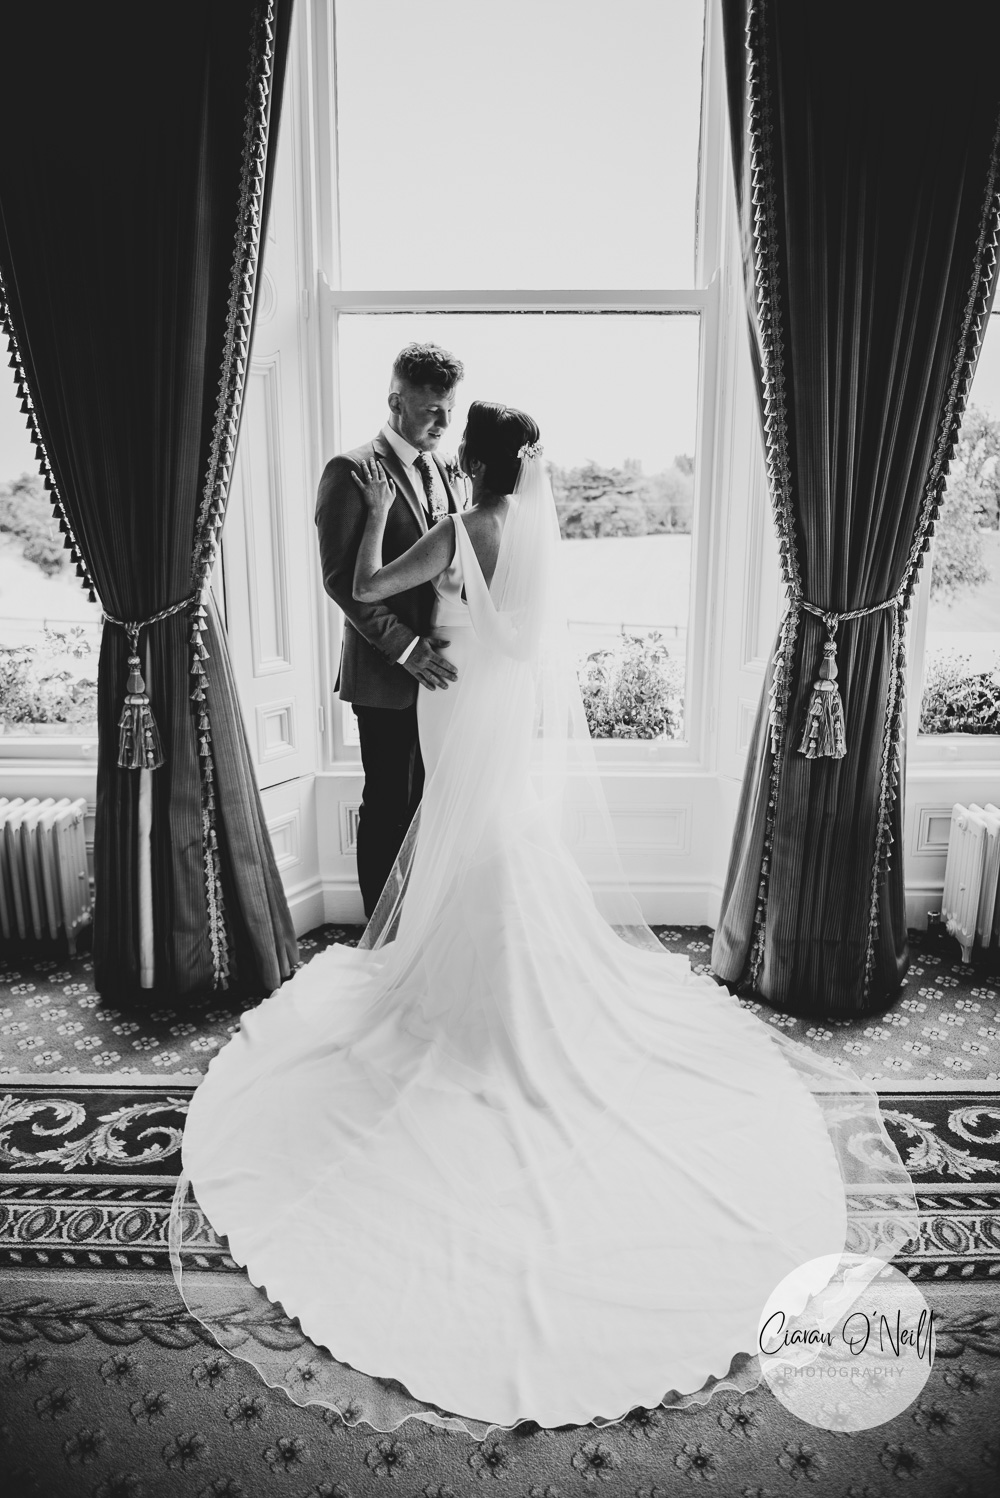 Bride & Groom looking at each other whilst standing in front of a window in the Manor House